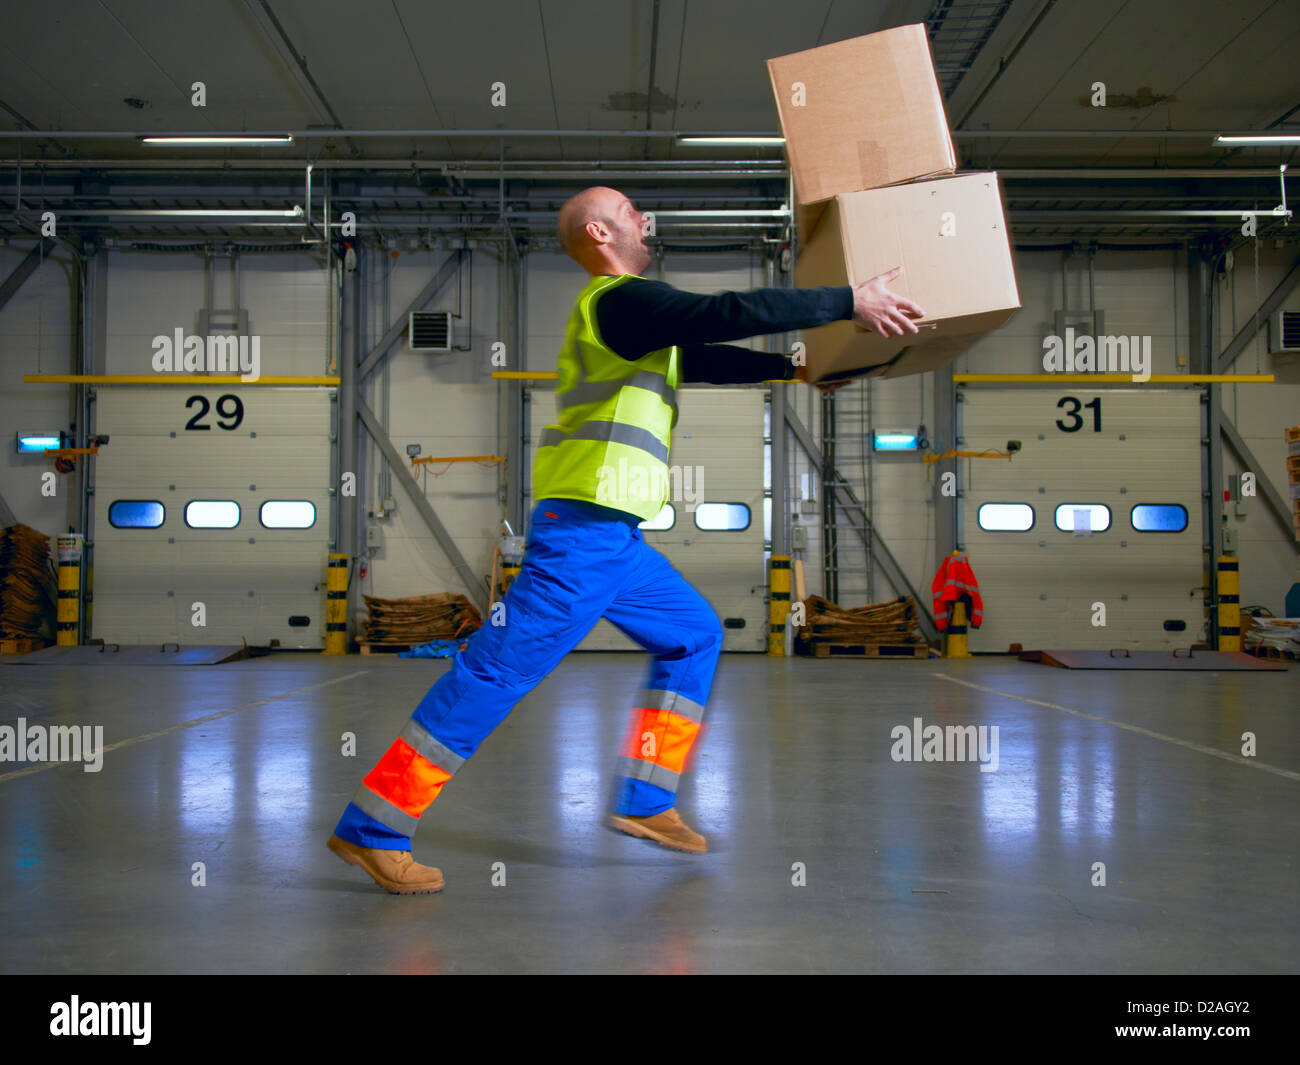 Worker balancing boxes in warehouse Stock Photo